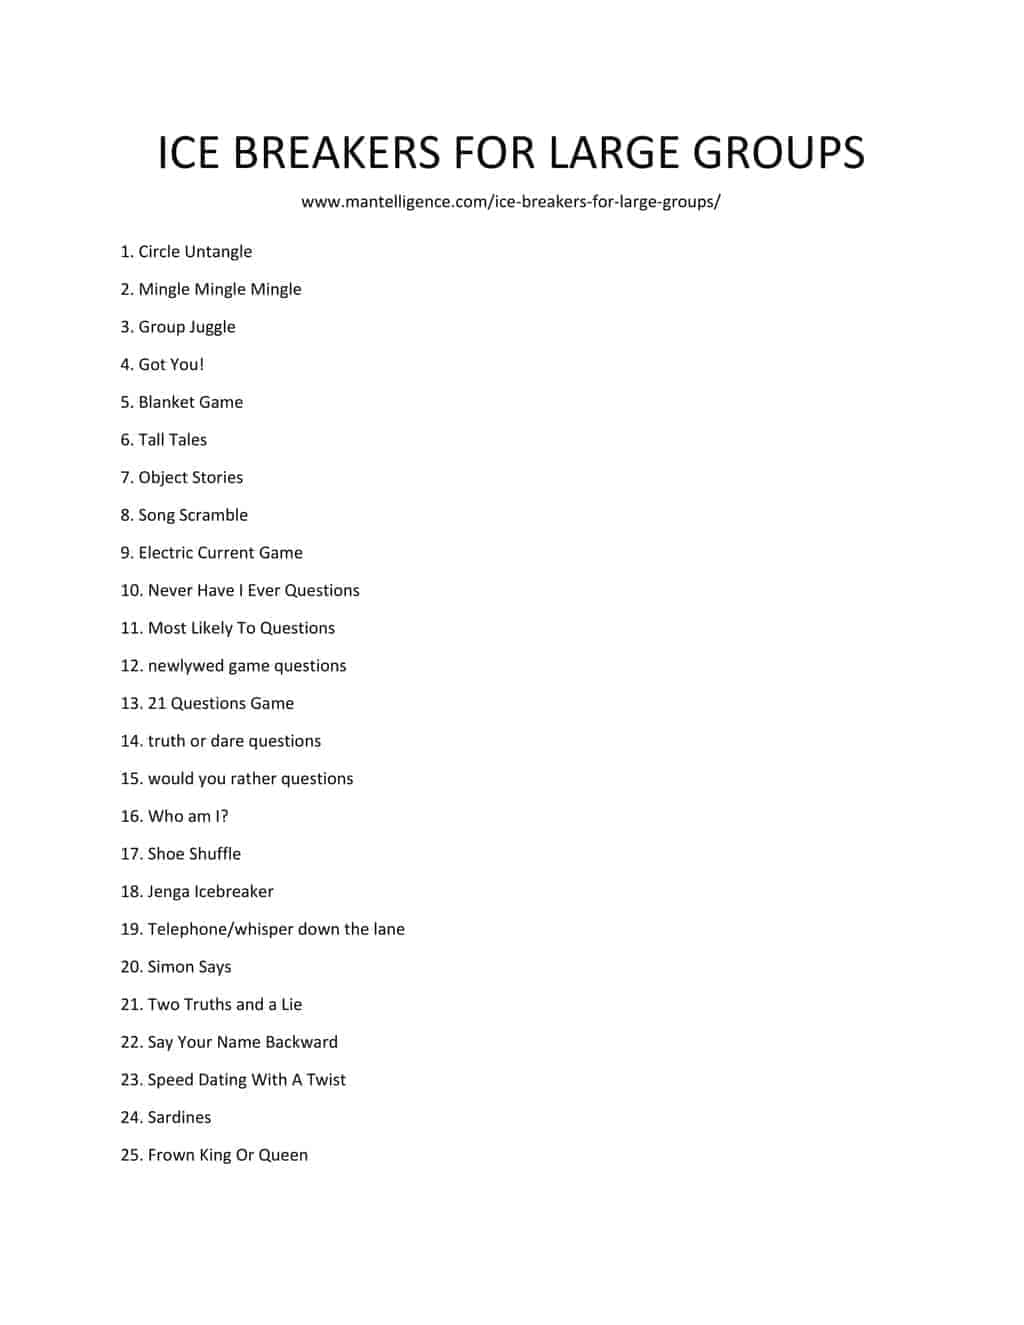 ICE_BREAKERS_FOR_LARGE_GROUPS-1[1]